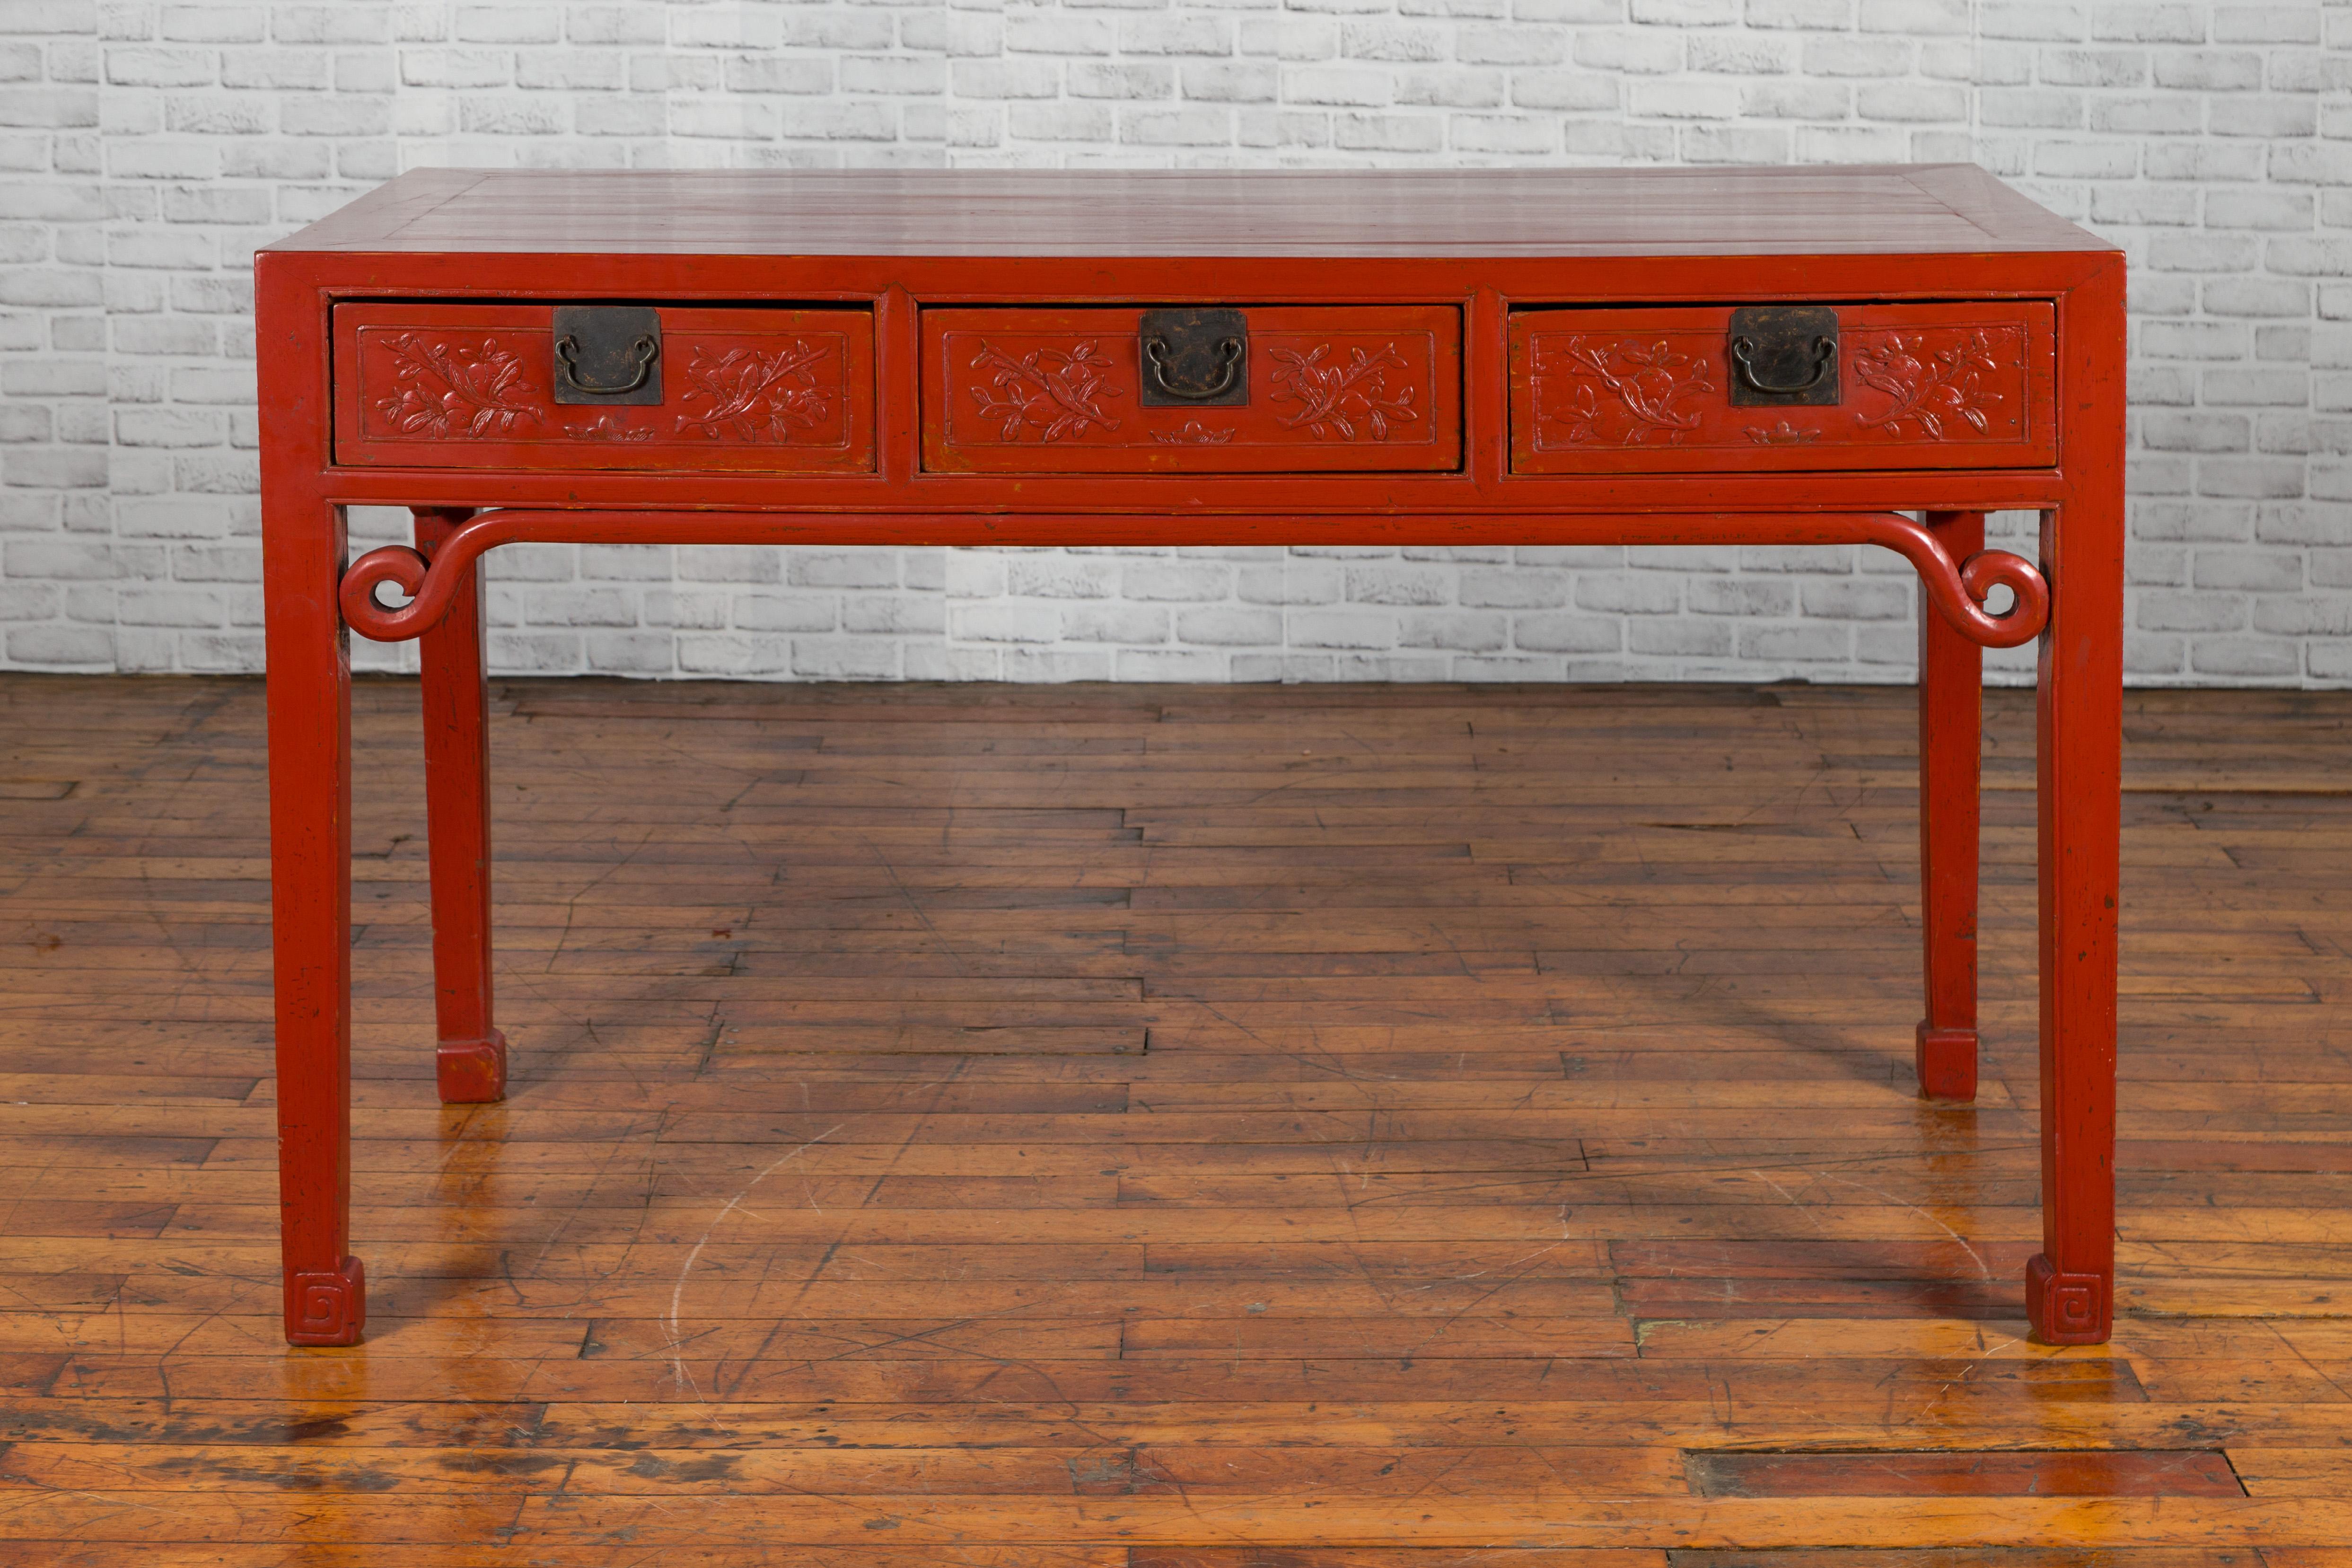 A Chinese Qing Dynasty period red lacquered desk from the 19th century, with three drawers, carved stretcher and scrolling feet. Created in China during the Qing Dynasty, this red lacquered desk features a rectangular top with central board, sitting